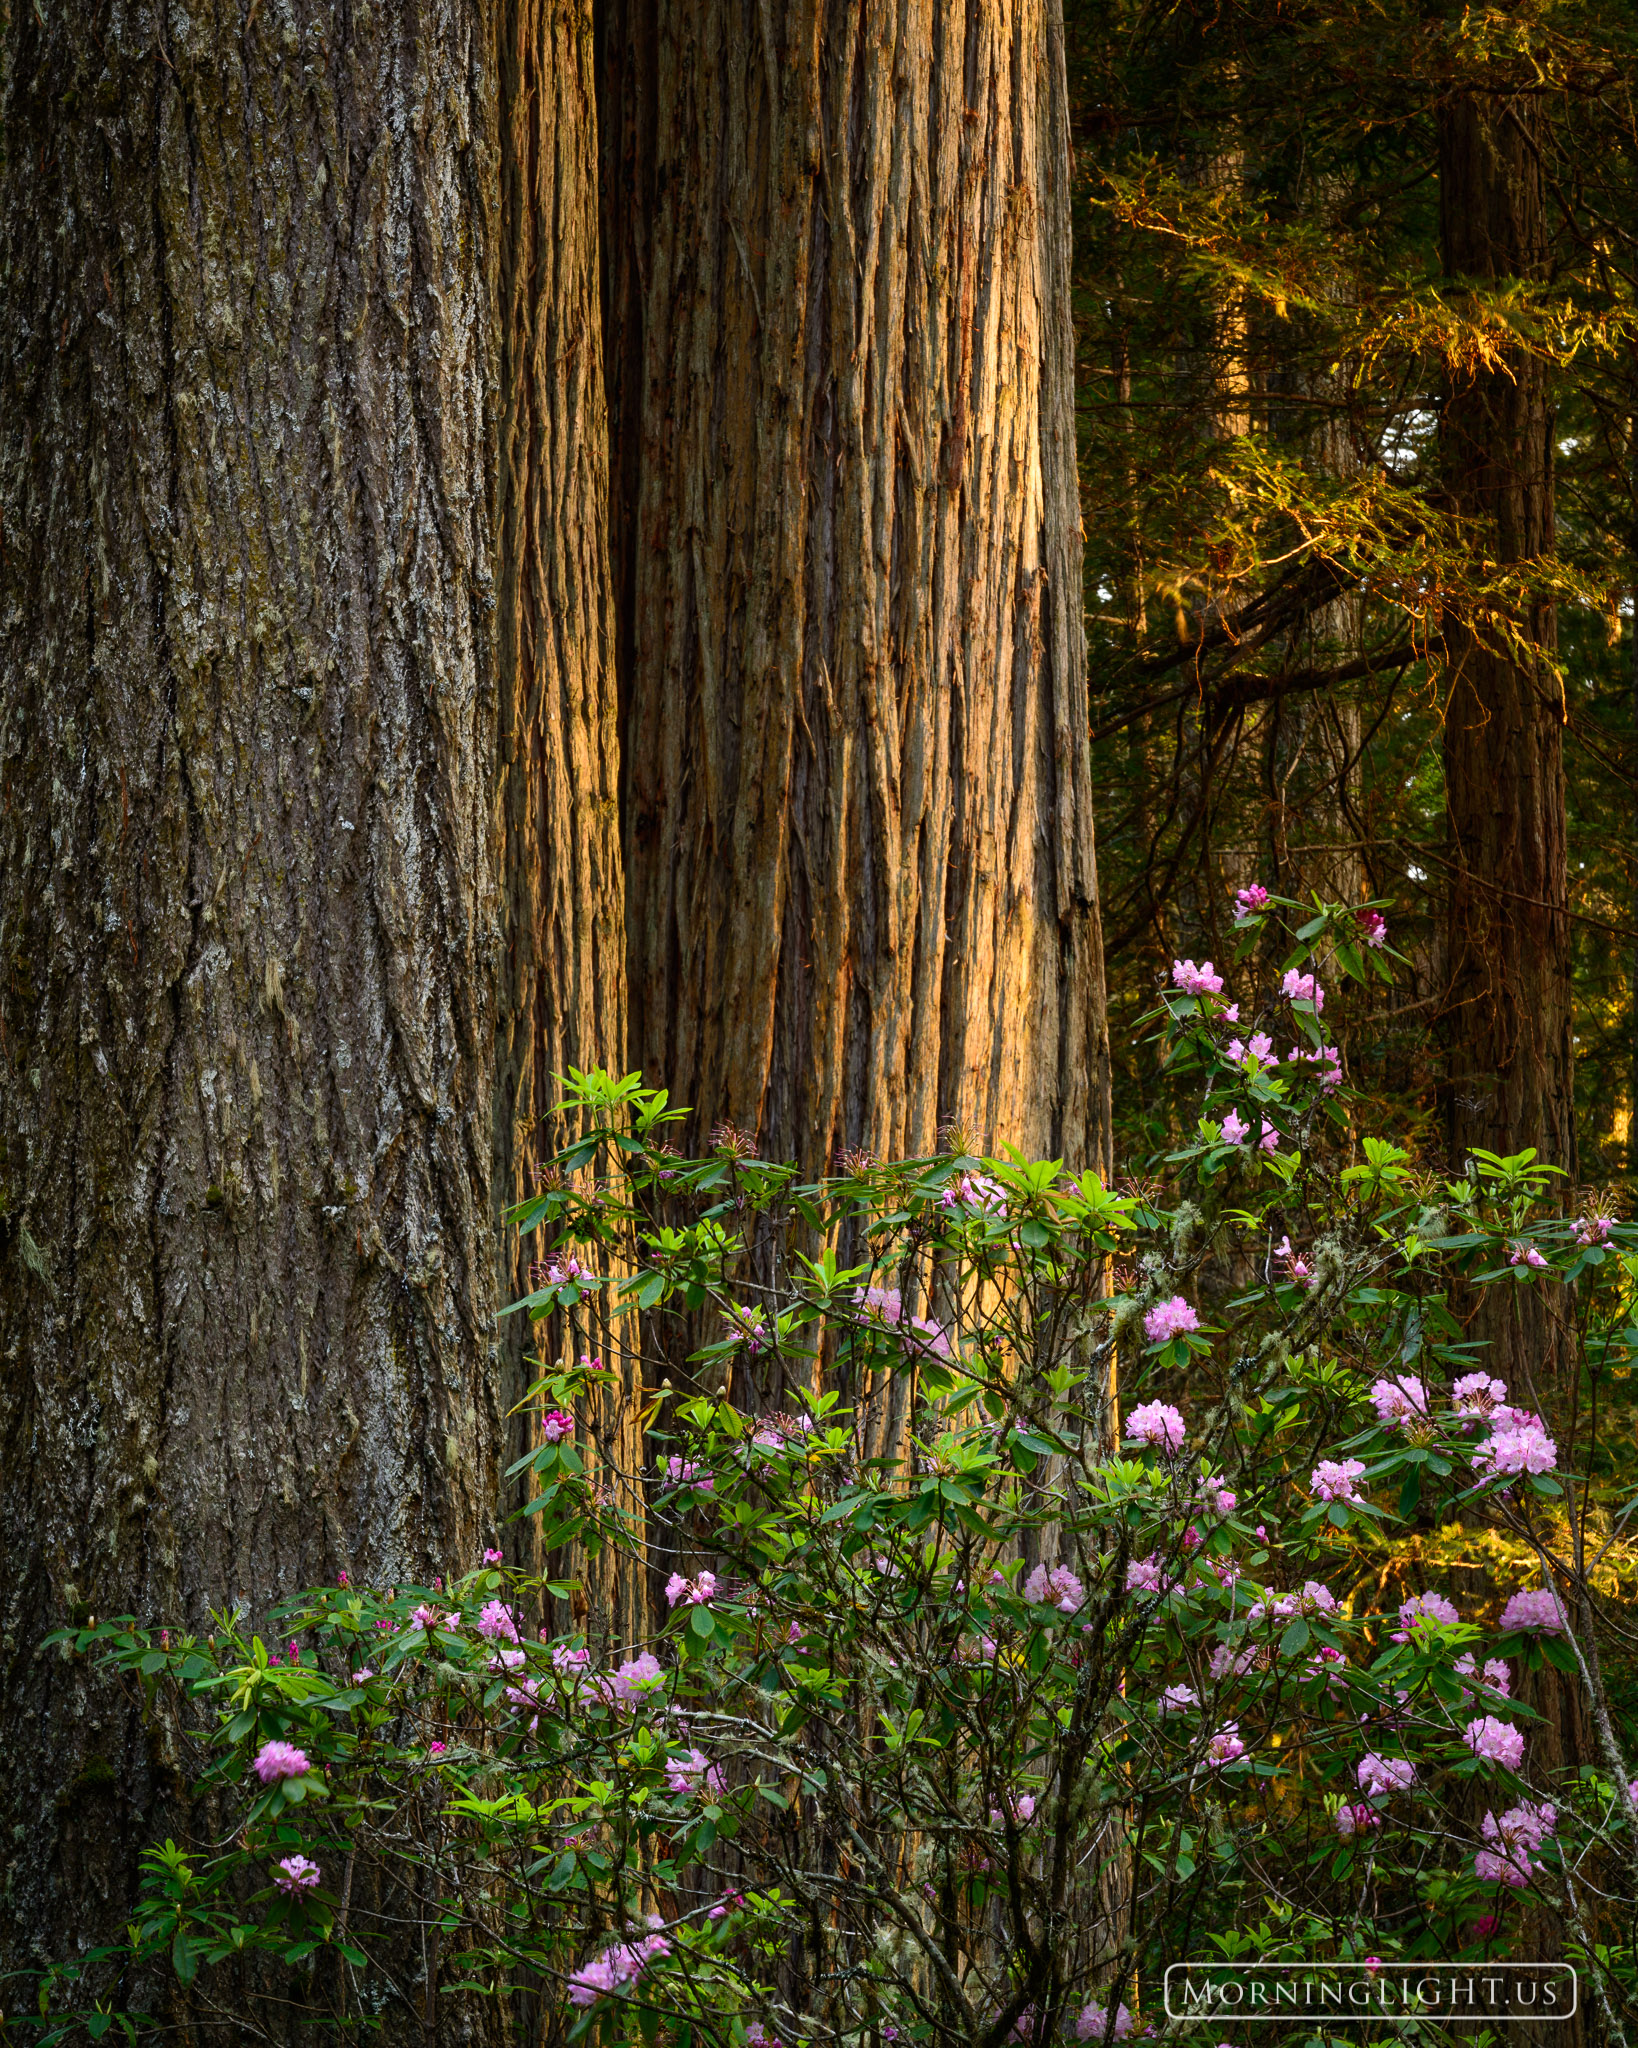 Rhododendrons bloom next to giant redwoods, filling the air with the most amazing aromas.